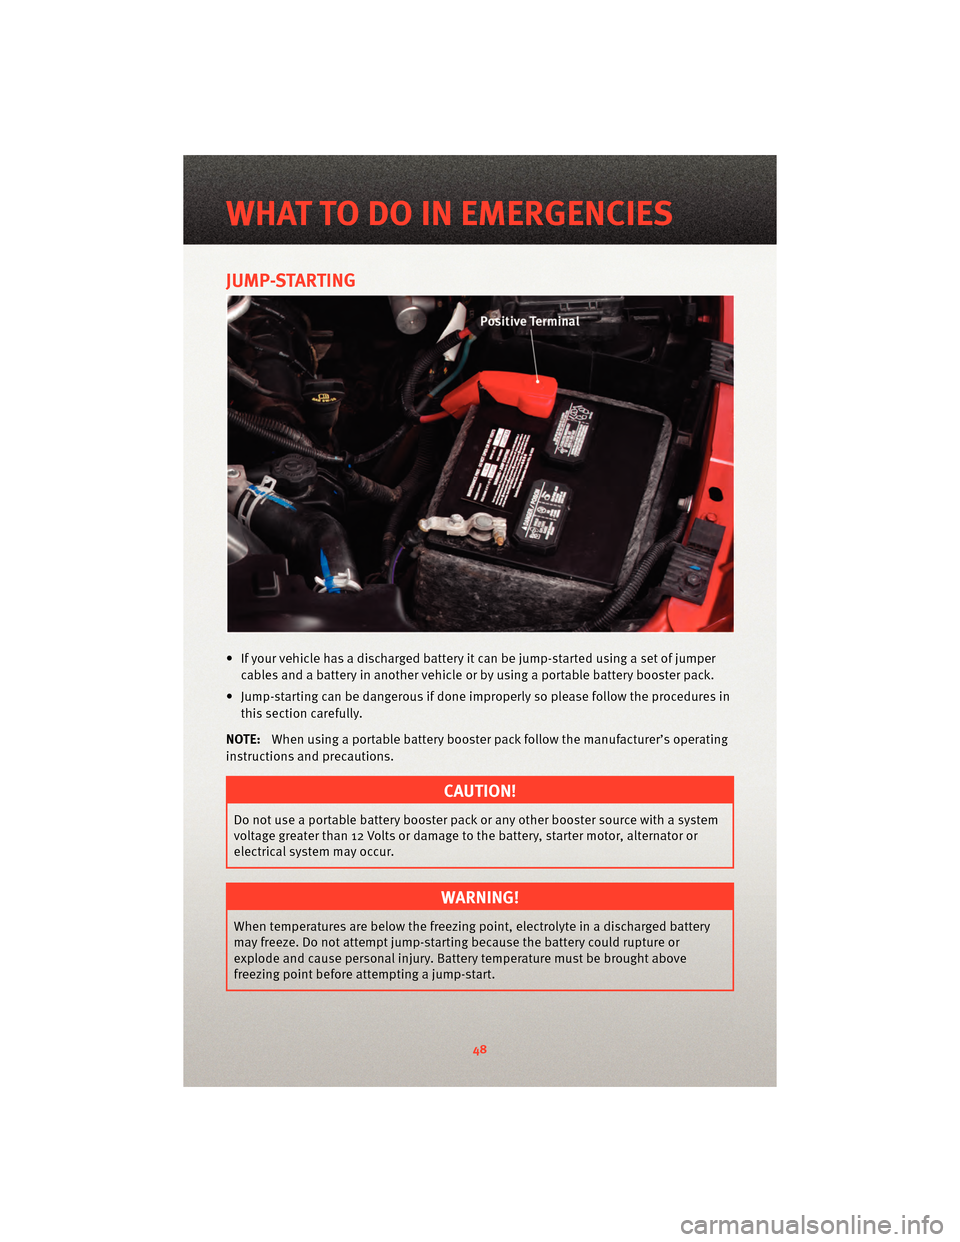 DODGE DAKOTA 2010 3.G User Guide JUMP-STARTING
• If your vehicle has a discharged battery it can be jump-started using a set of jumpercables and a battery in another vehicle or by using a portable battery booster pack.
• Jump-sta